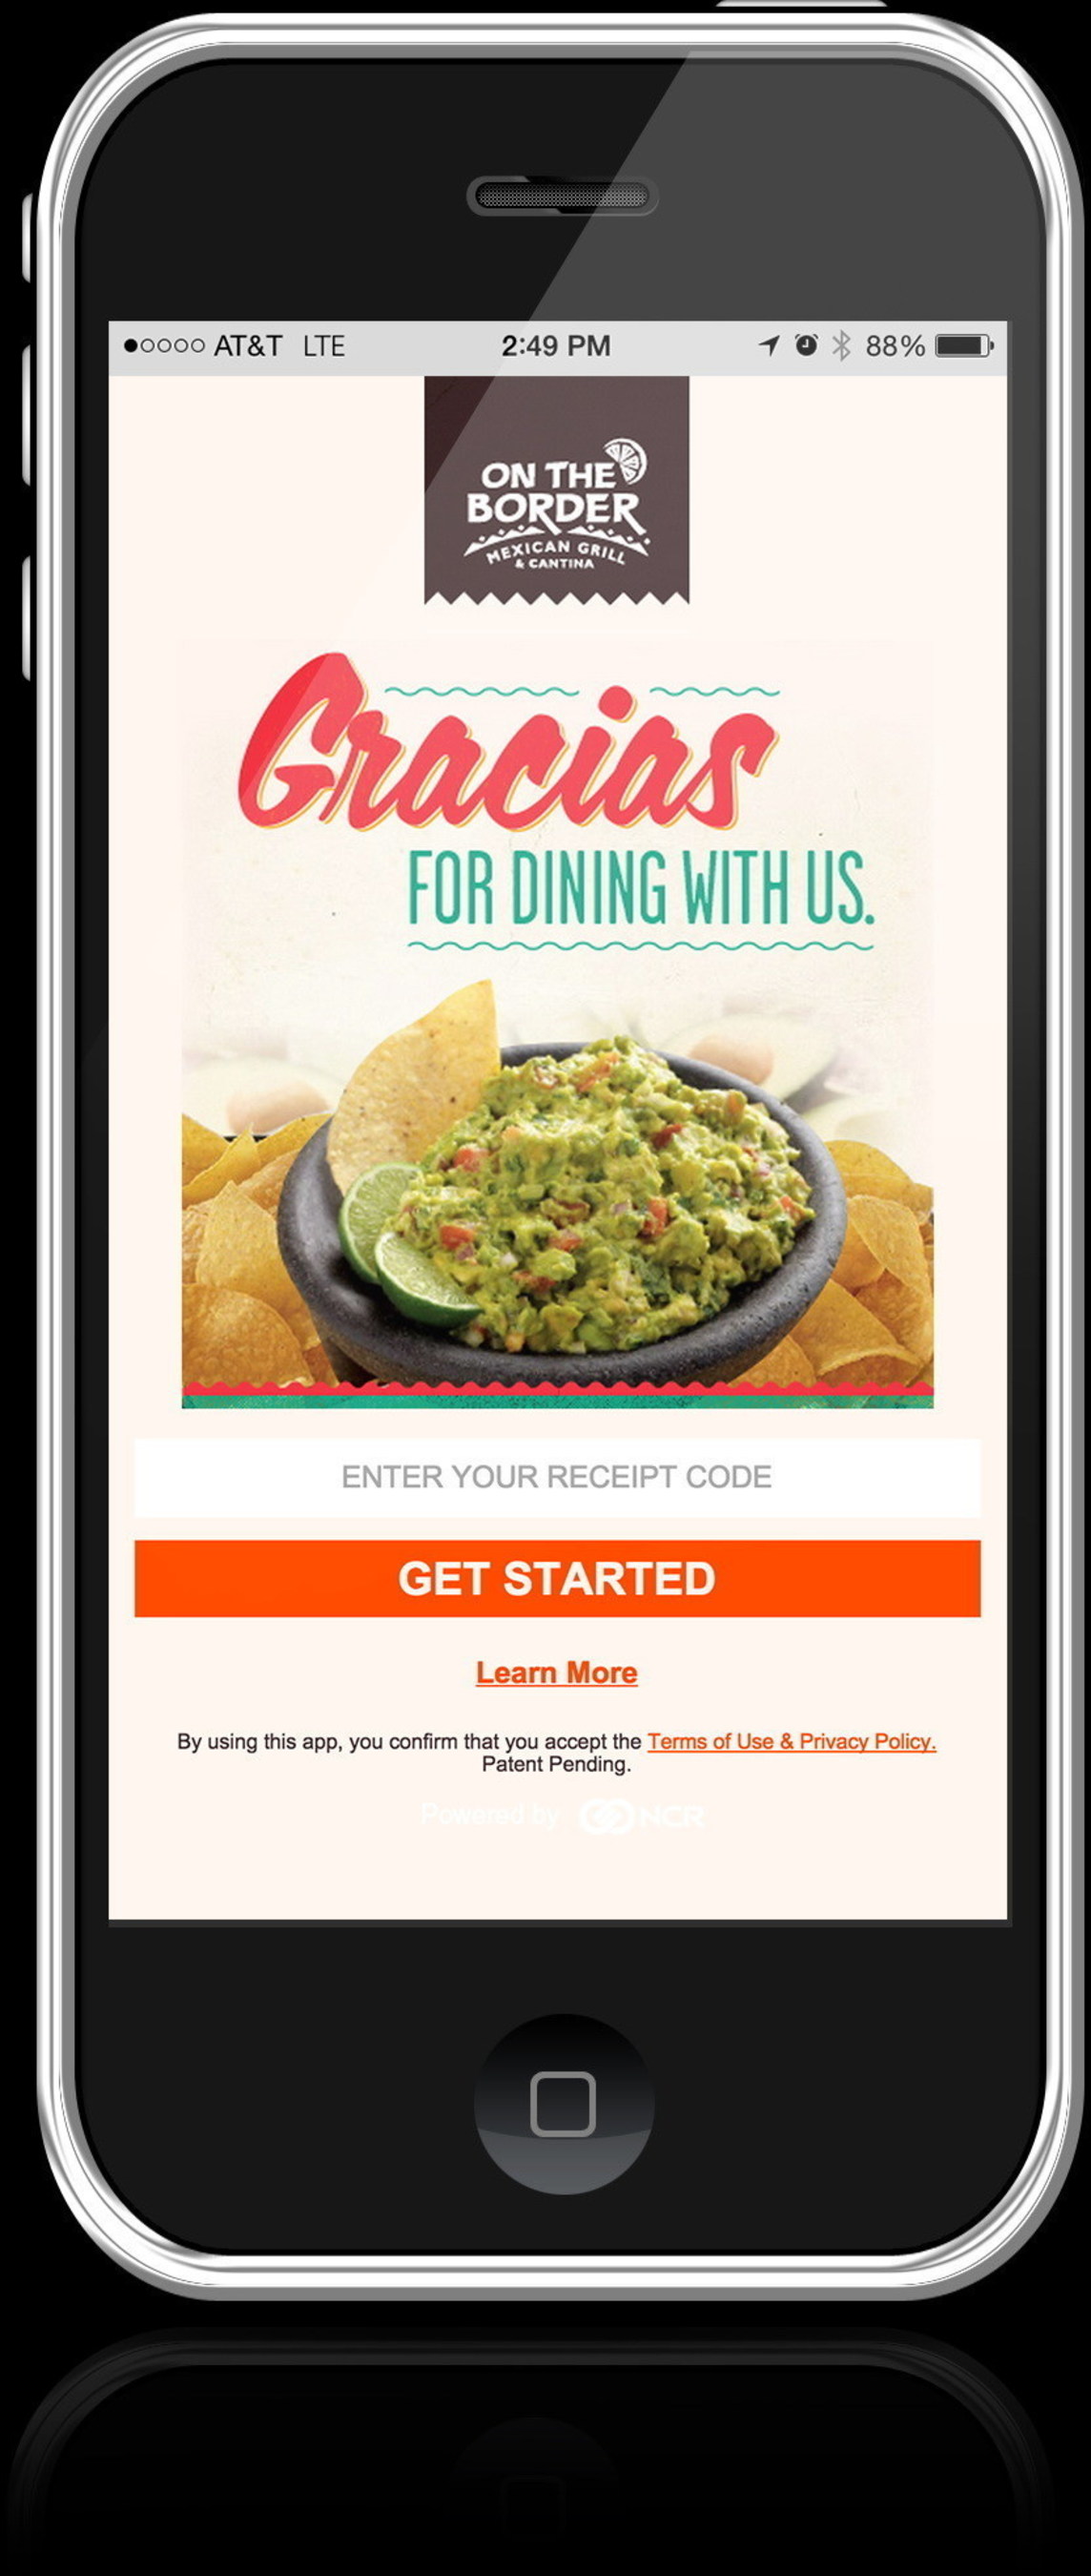 On The Border now offers Mobile Pay via NCR Corporation